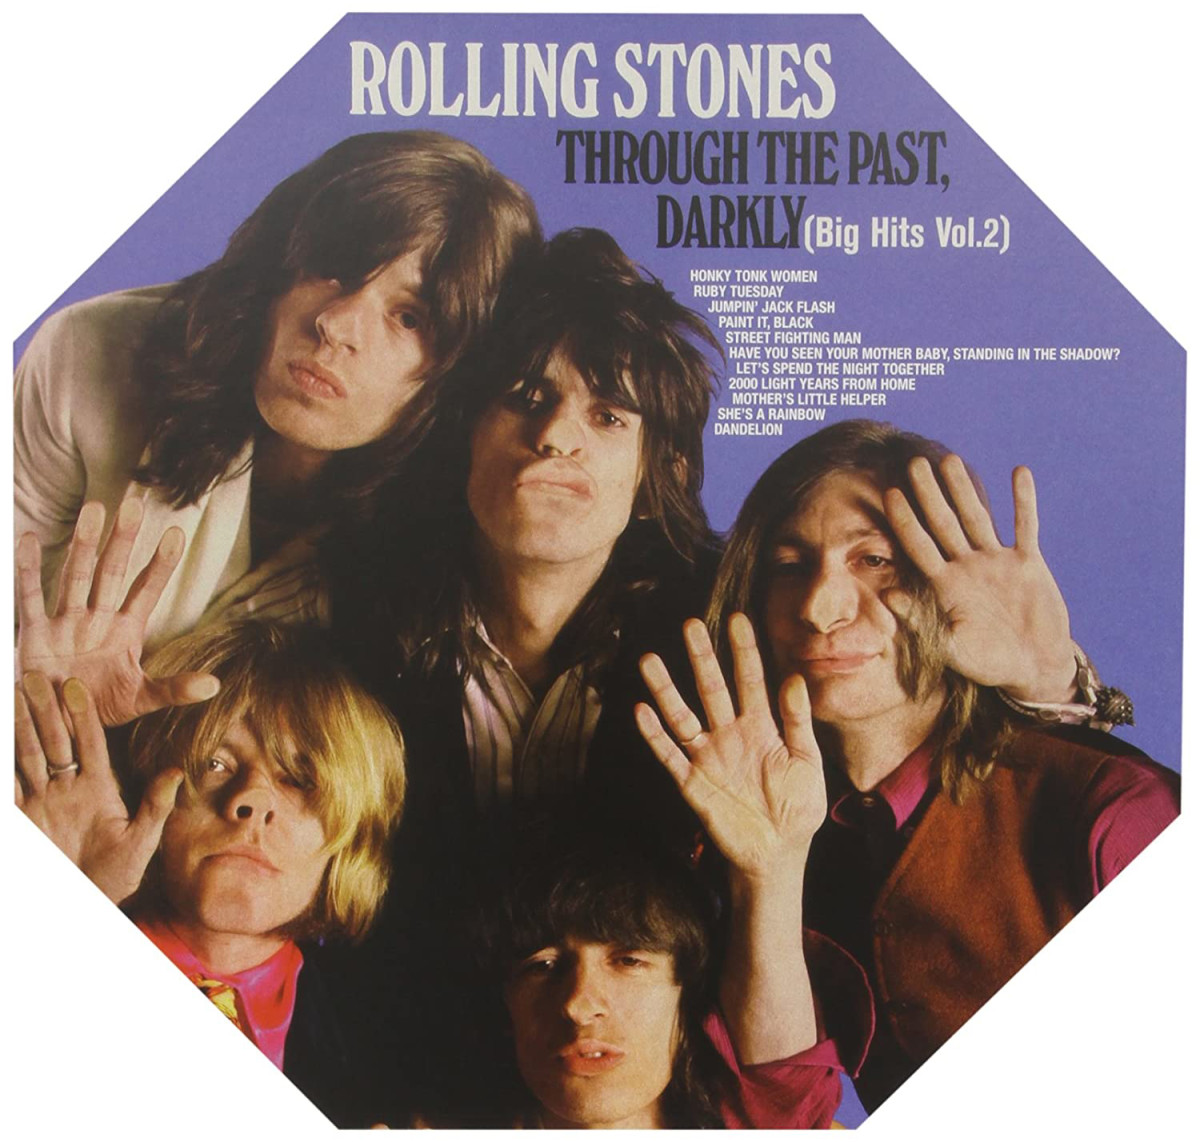 The Rolling Stones, Through the Past, Darkly (Big Hits Vol.2)  